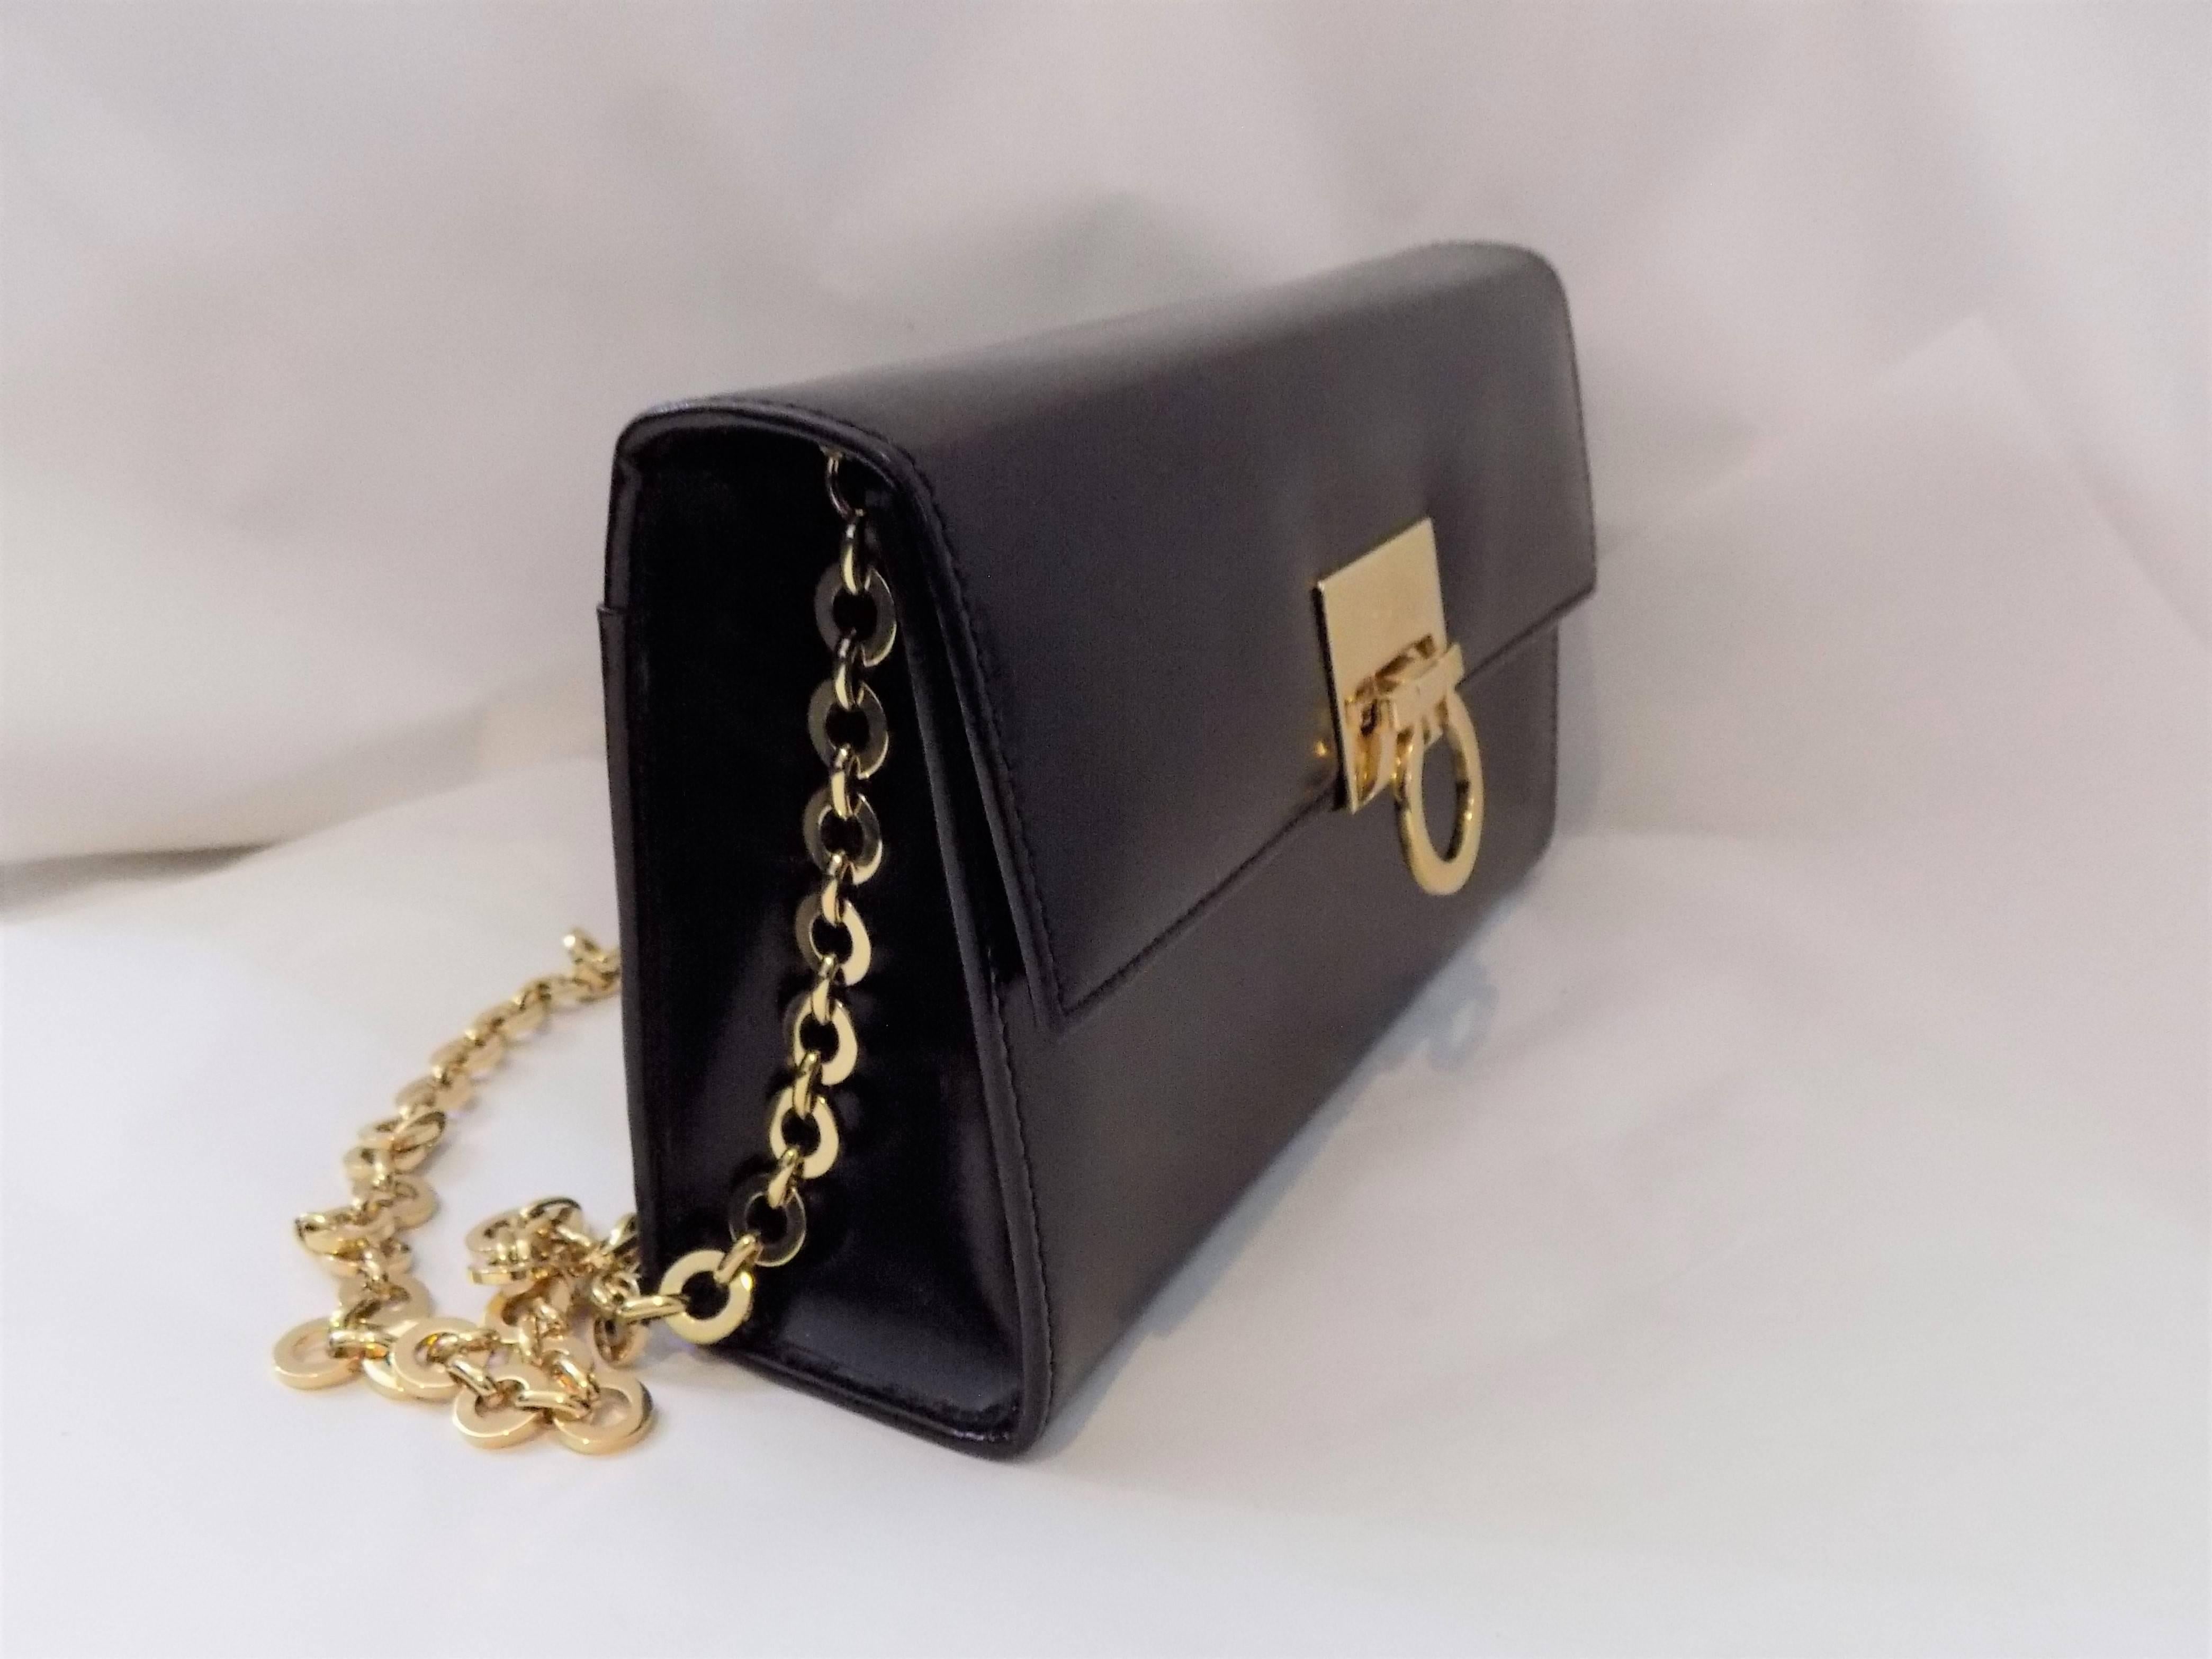 Structured  polished Black calf leather  shoulder bag from Salvatore Ferragamo featuring a Gold-tone chain  removable houlder strap, a holdover top with snap closure,Gancio lock  a gold -tone logo plaque and an internal slip pocket. 
Like new